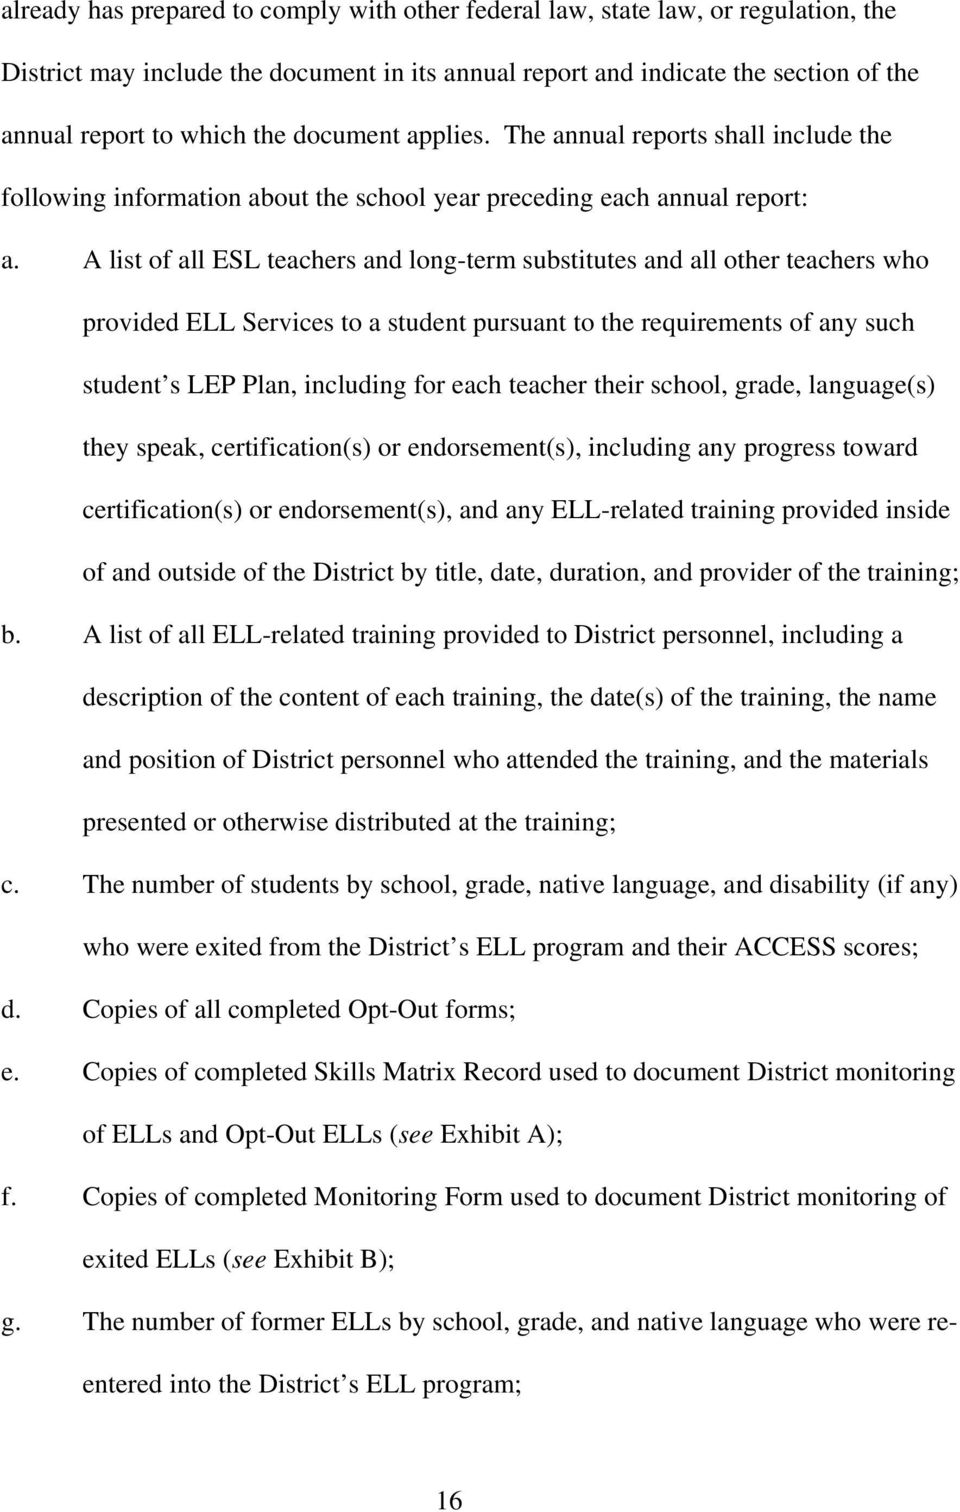 A list of all ESL teachers and long-term substitutes and all other teachers who provided ELL Services to a student pursuant to the requirements of any such student s LEP Plan, including for each